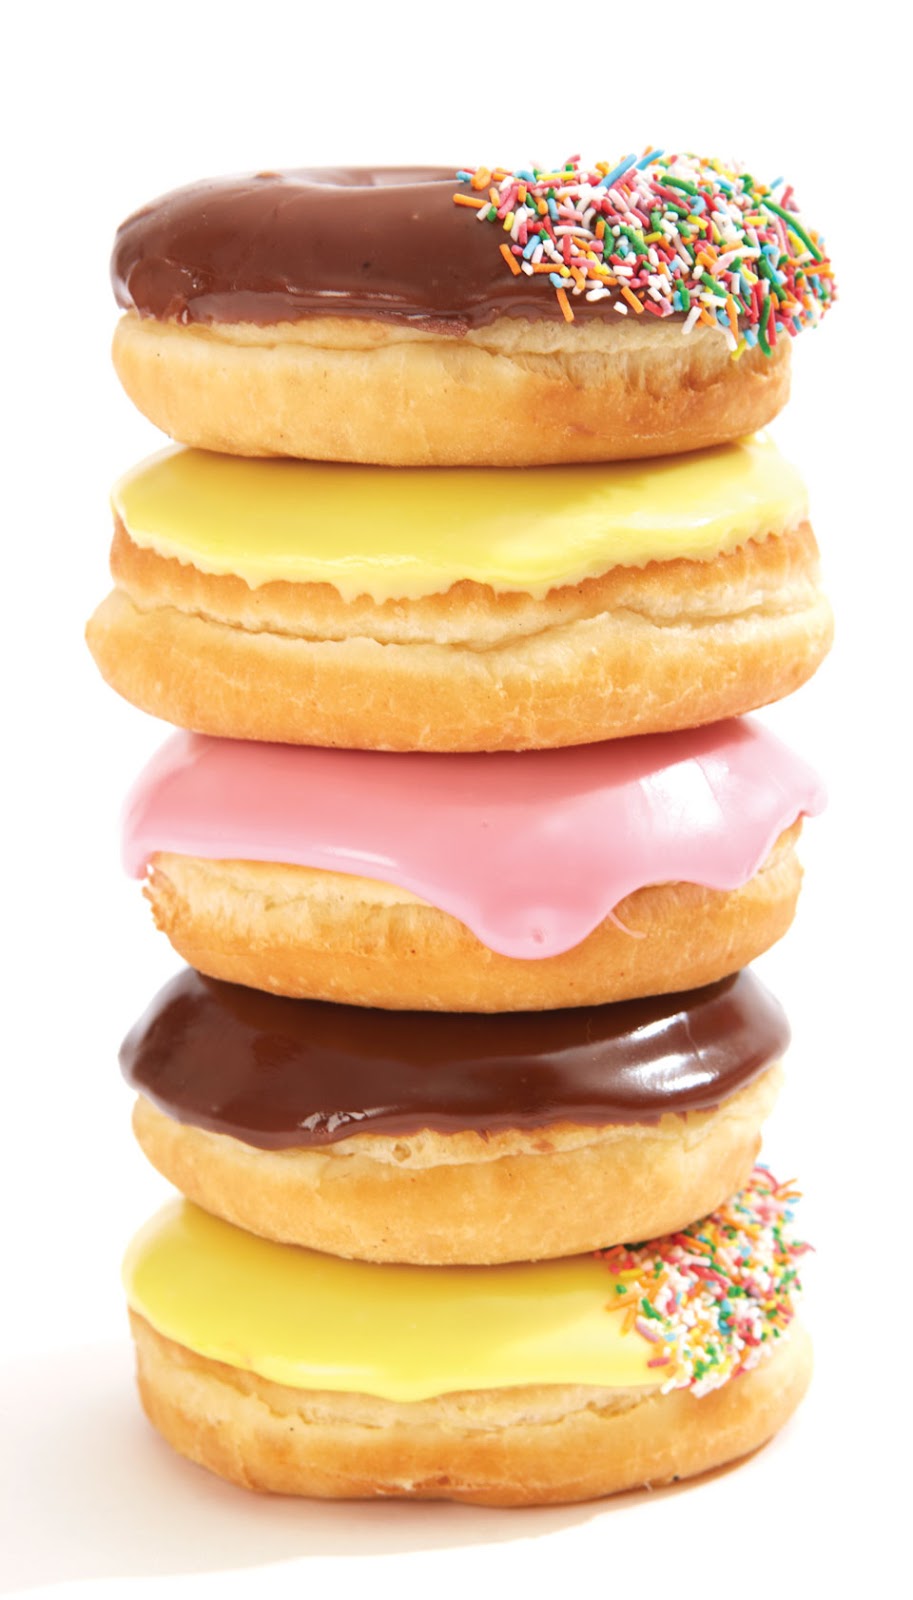 Stacked Cream Filled Donuts At Glenroy Bakery